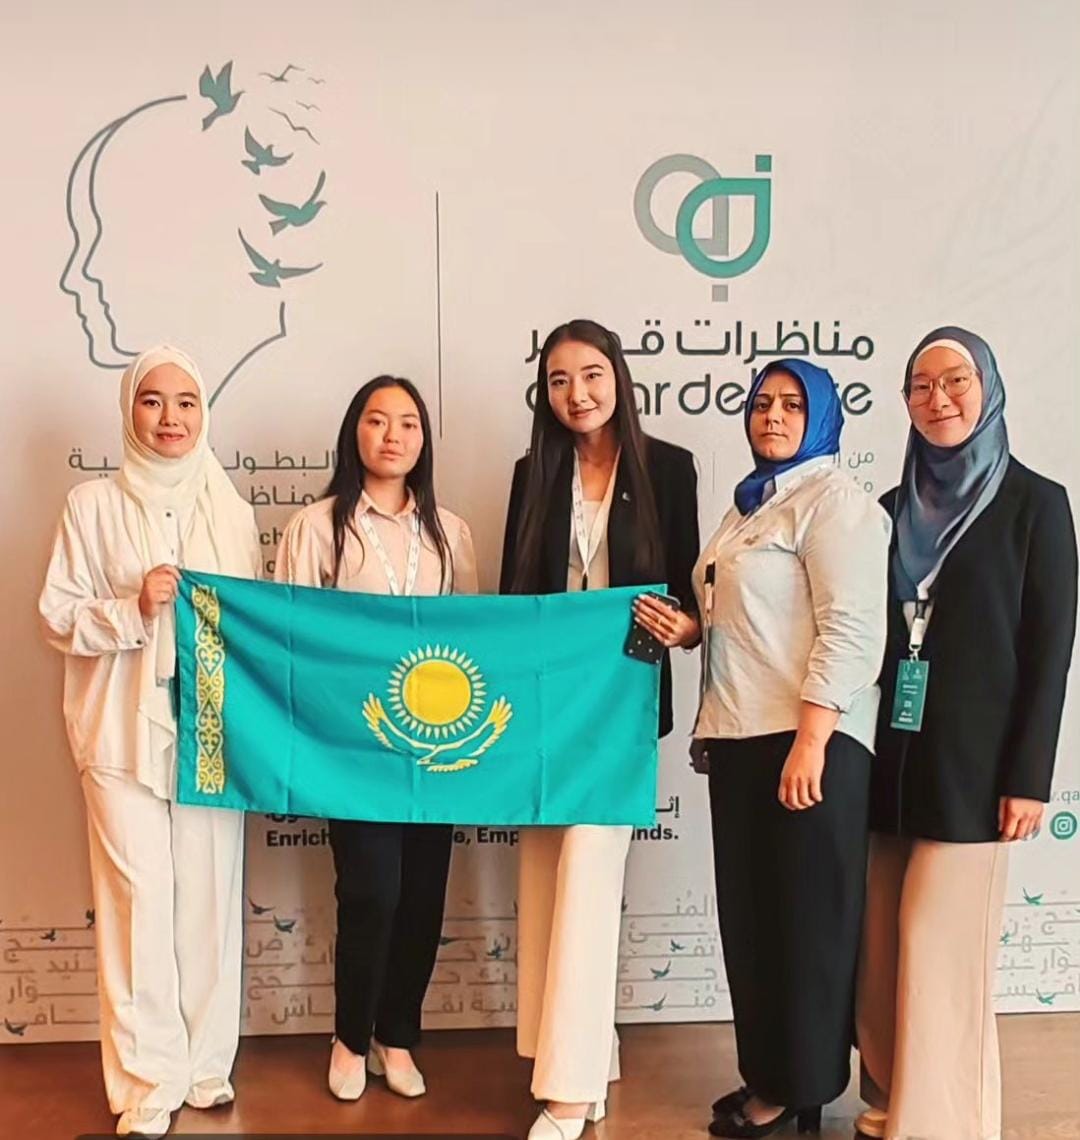 Students of the Faculty of Oriental Studies of Al-Farabi Kazakh National University take part in the International Championship in Qatar, Doha.